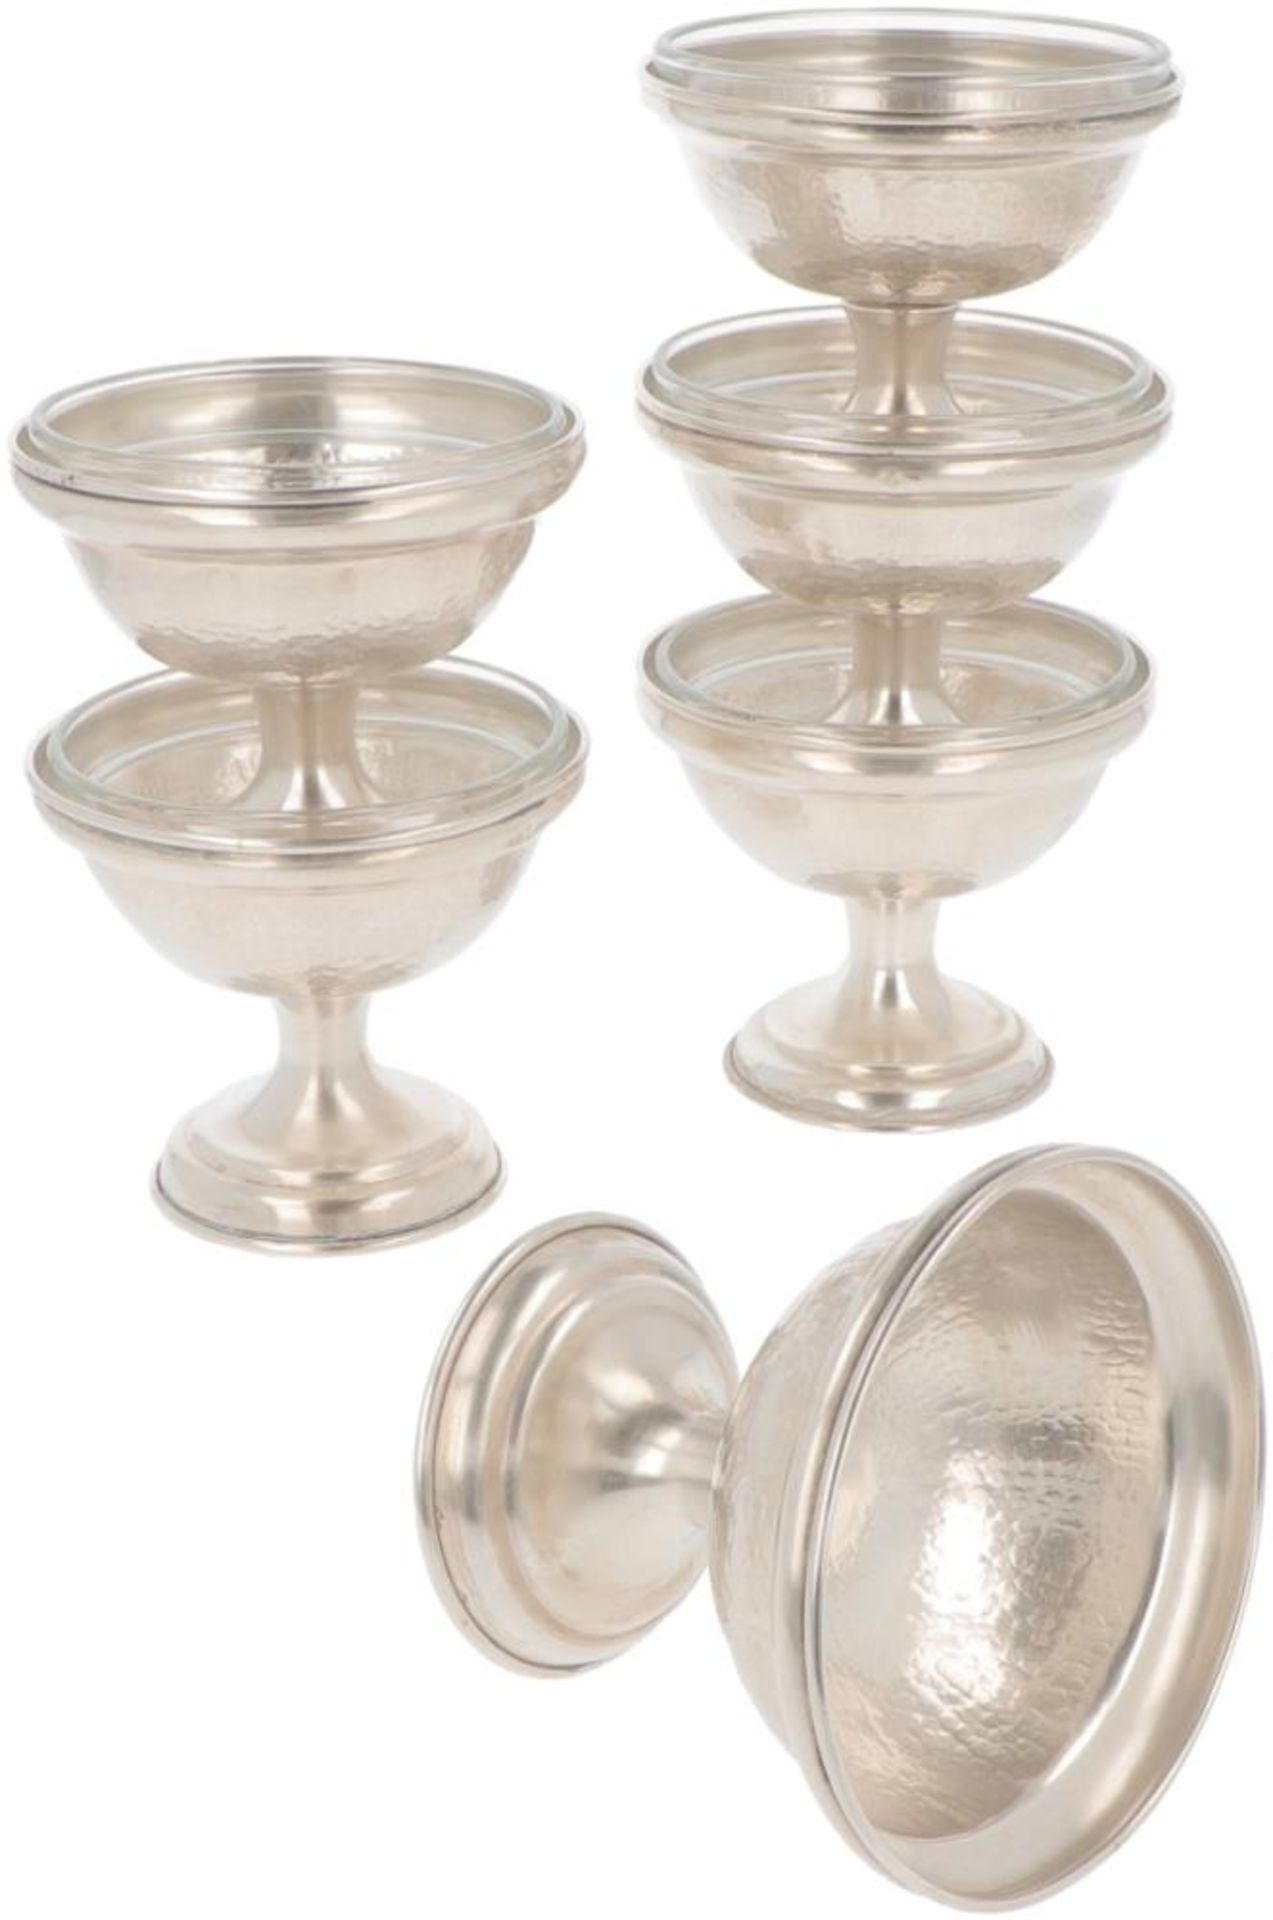 (6) piece set of ice cream coupes silver.